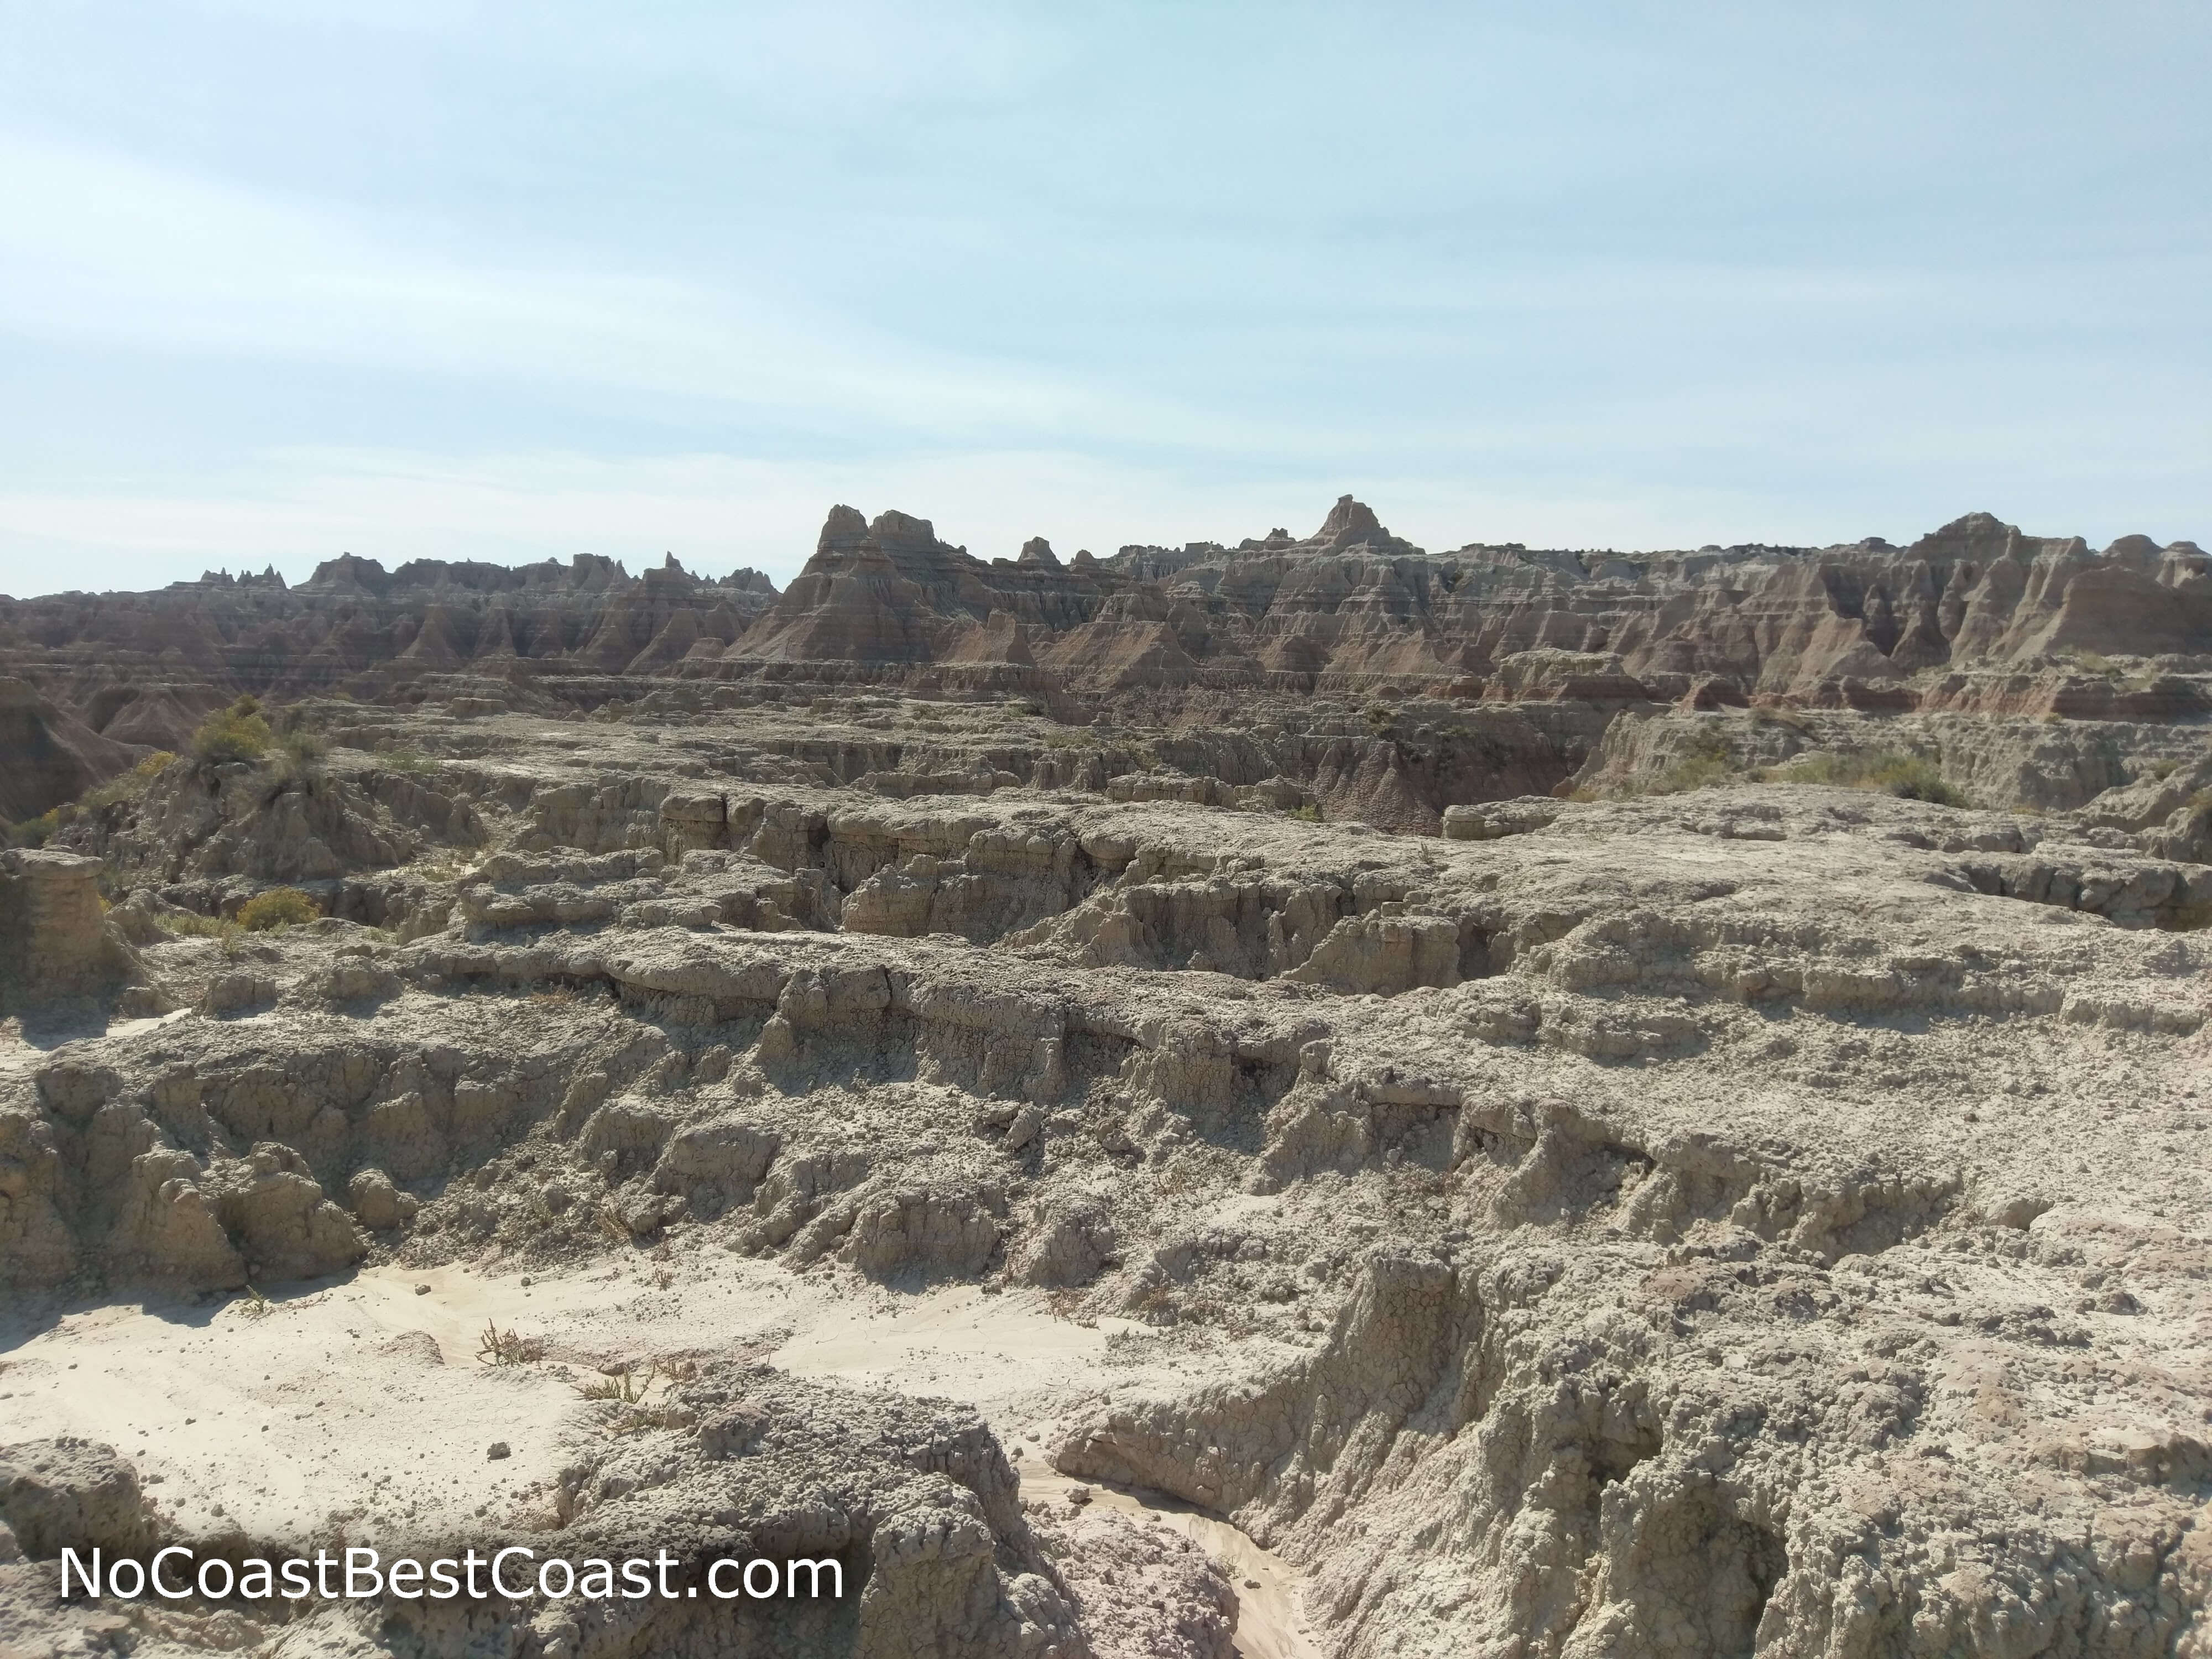 Layers upon layers of rock compose the cool geology of the badlands